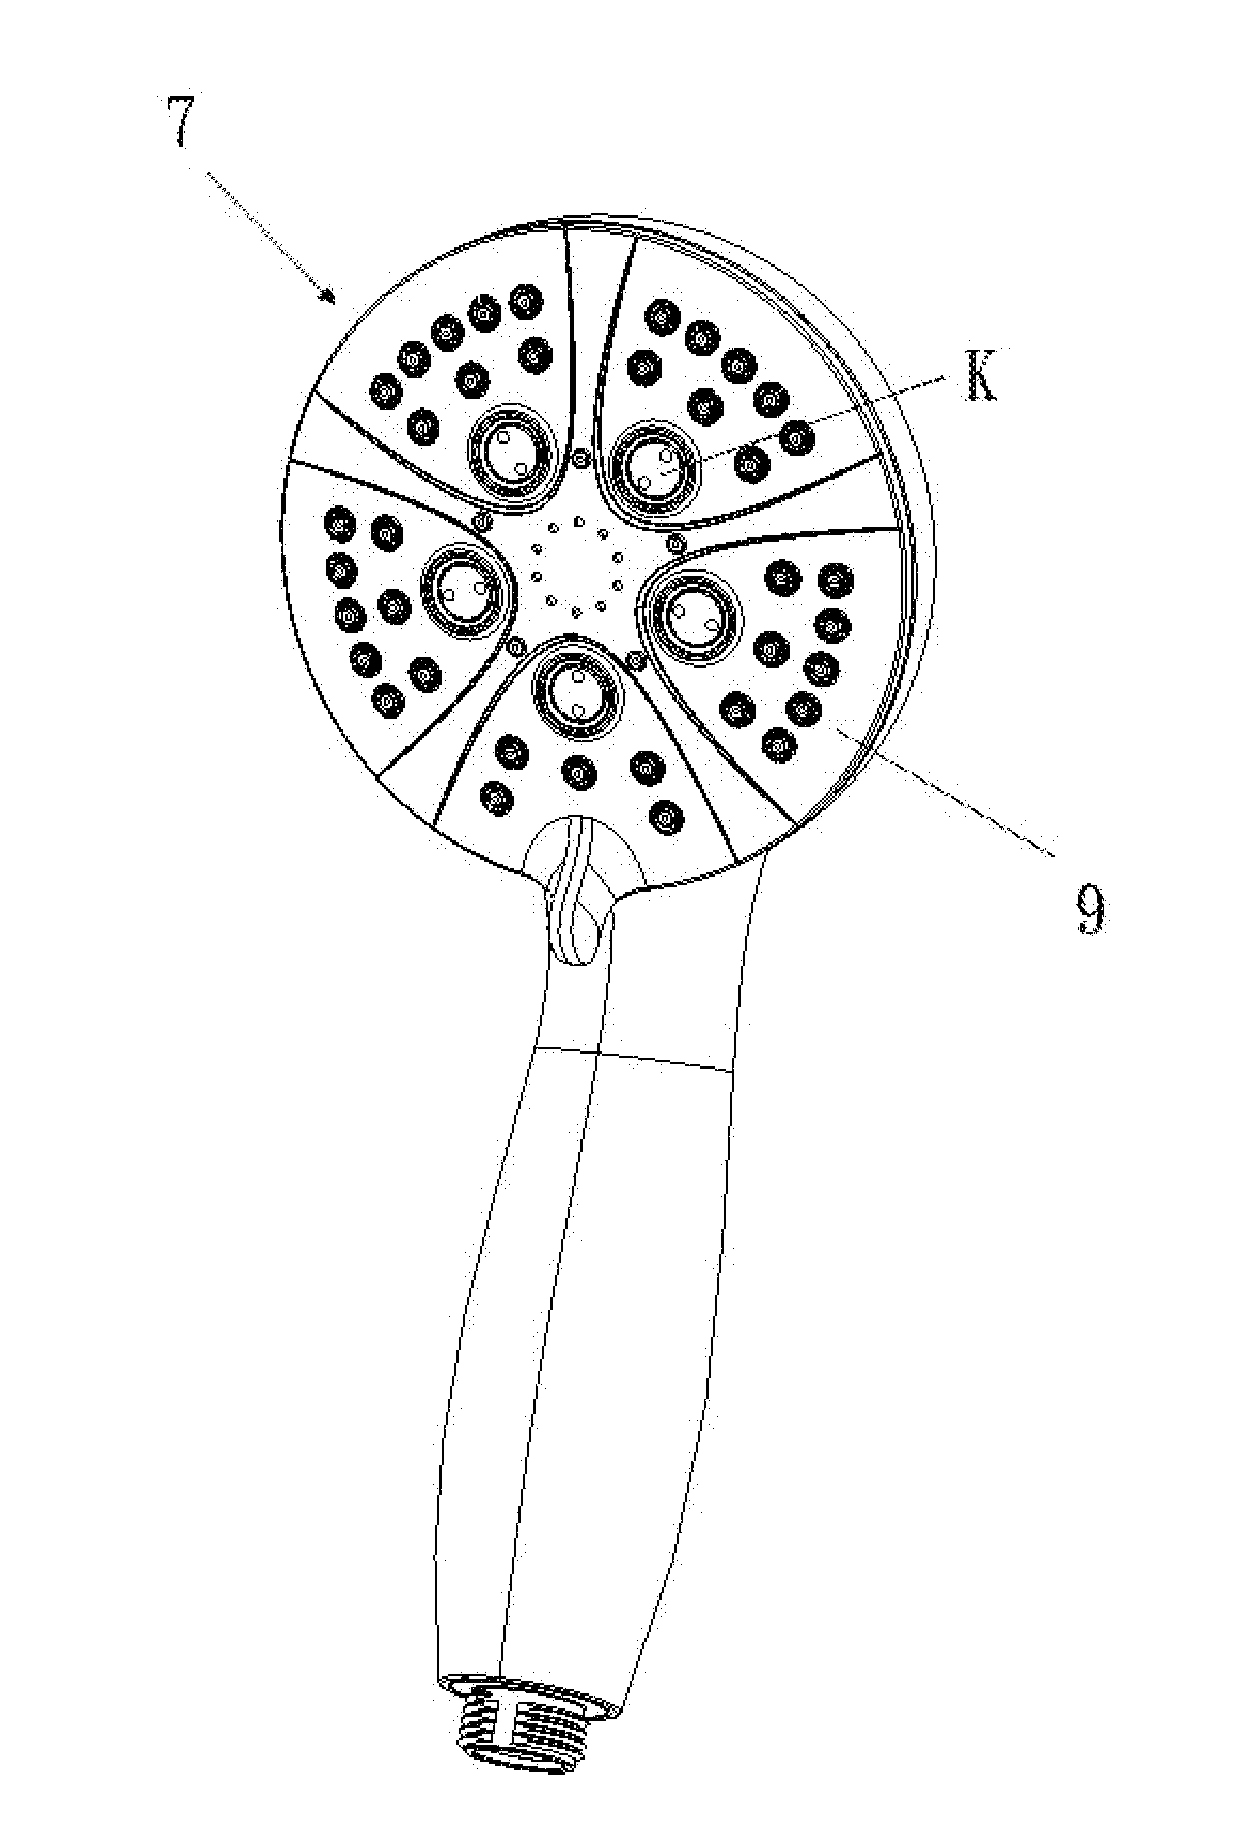 Water outlet valve core of a wall mounted shower head and water output device using the same